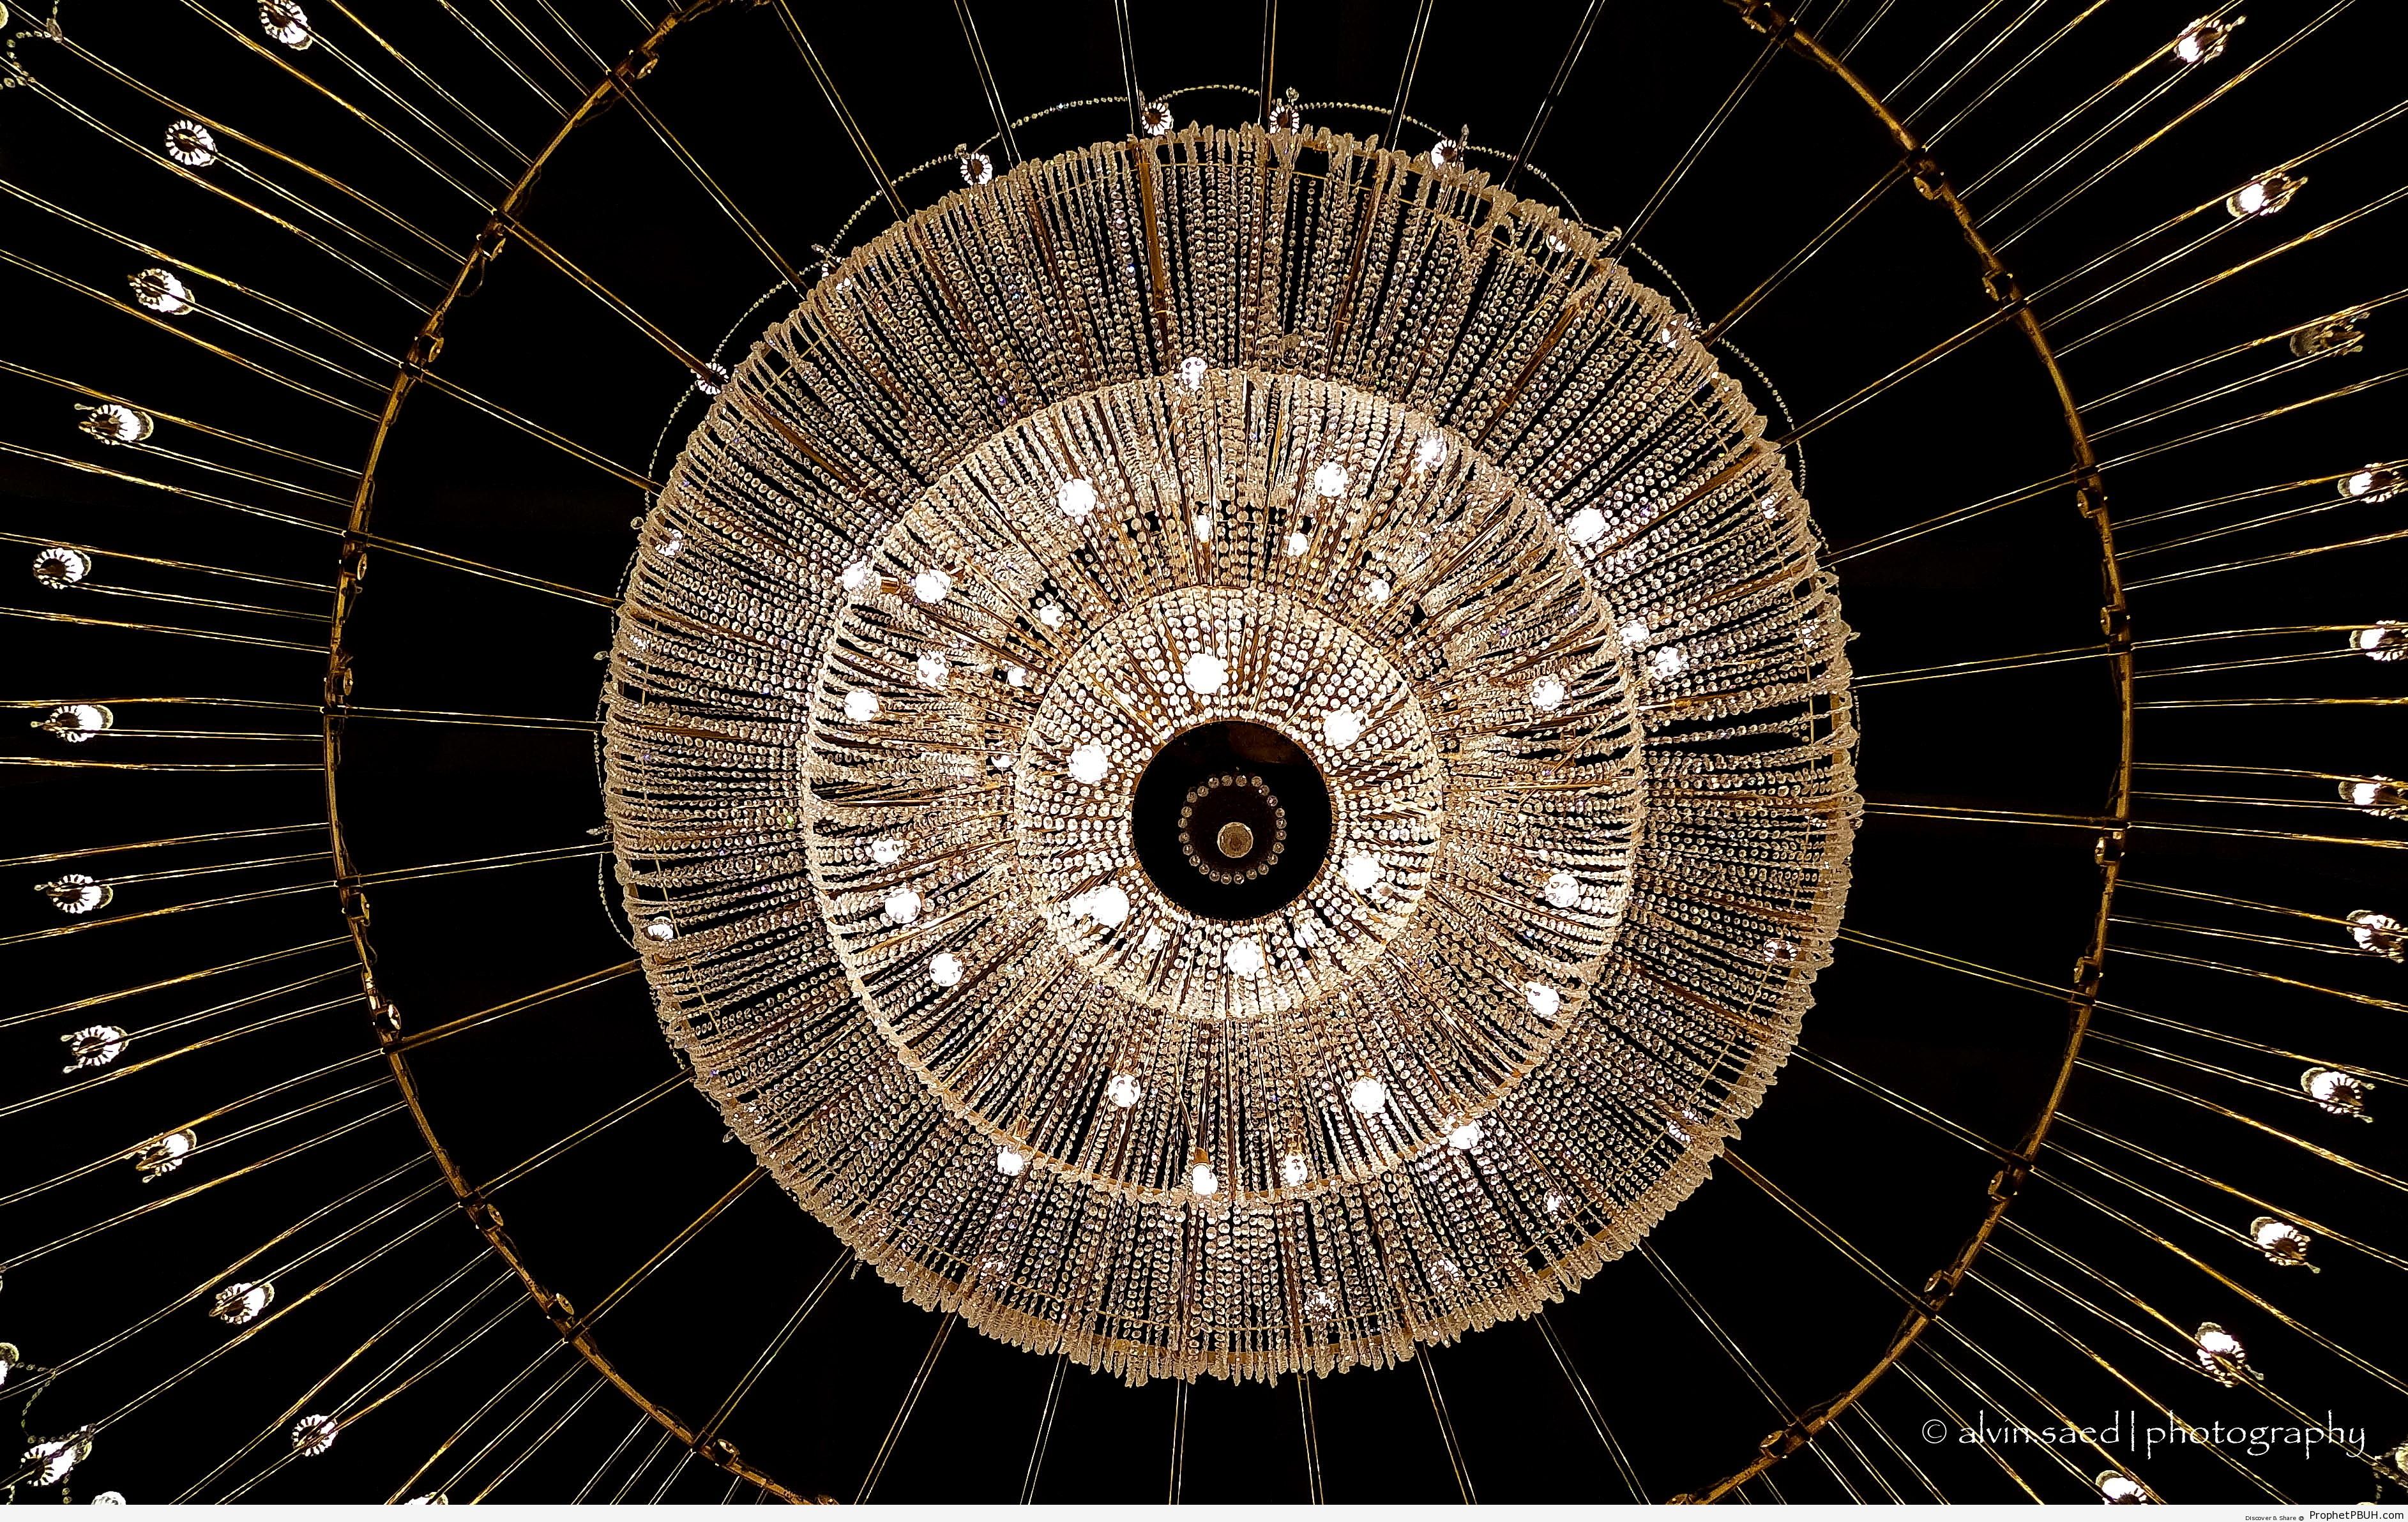 Chandelier at the Mosque of Aisha (RA) in Makkah, Saudi Arabia - Artist- Alvin A. Saed -Picture